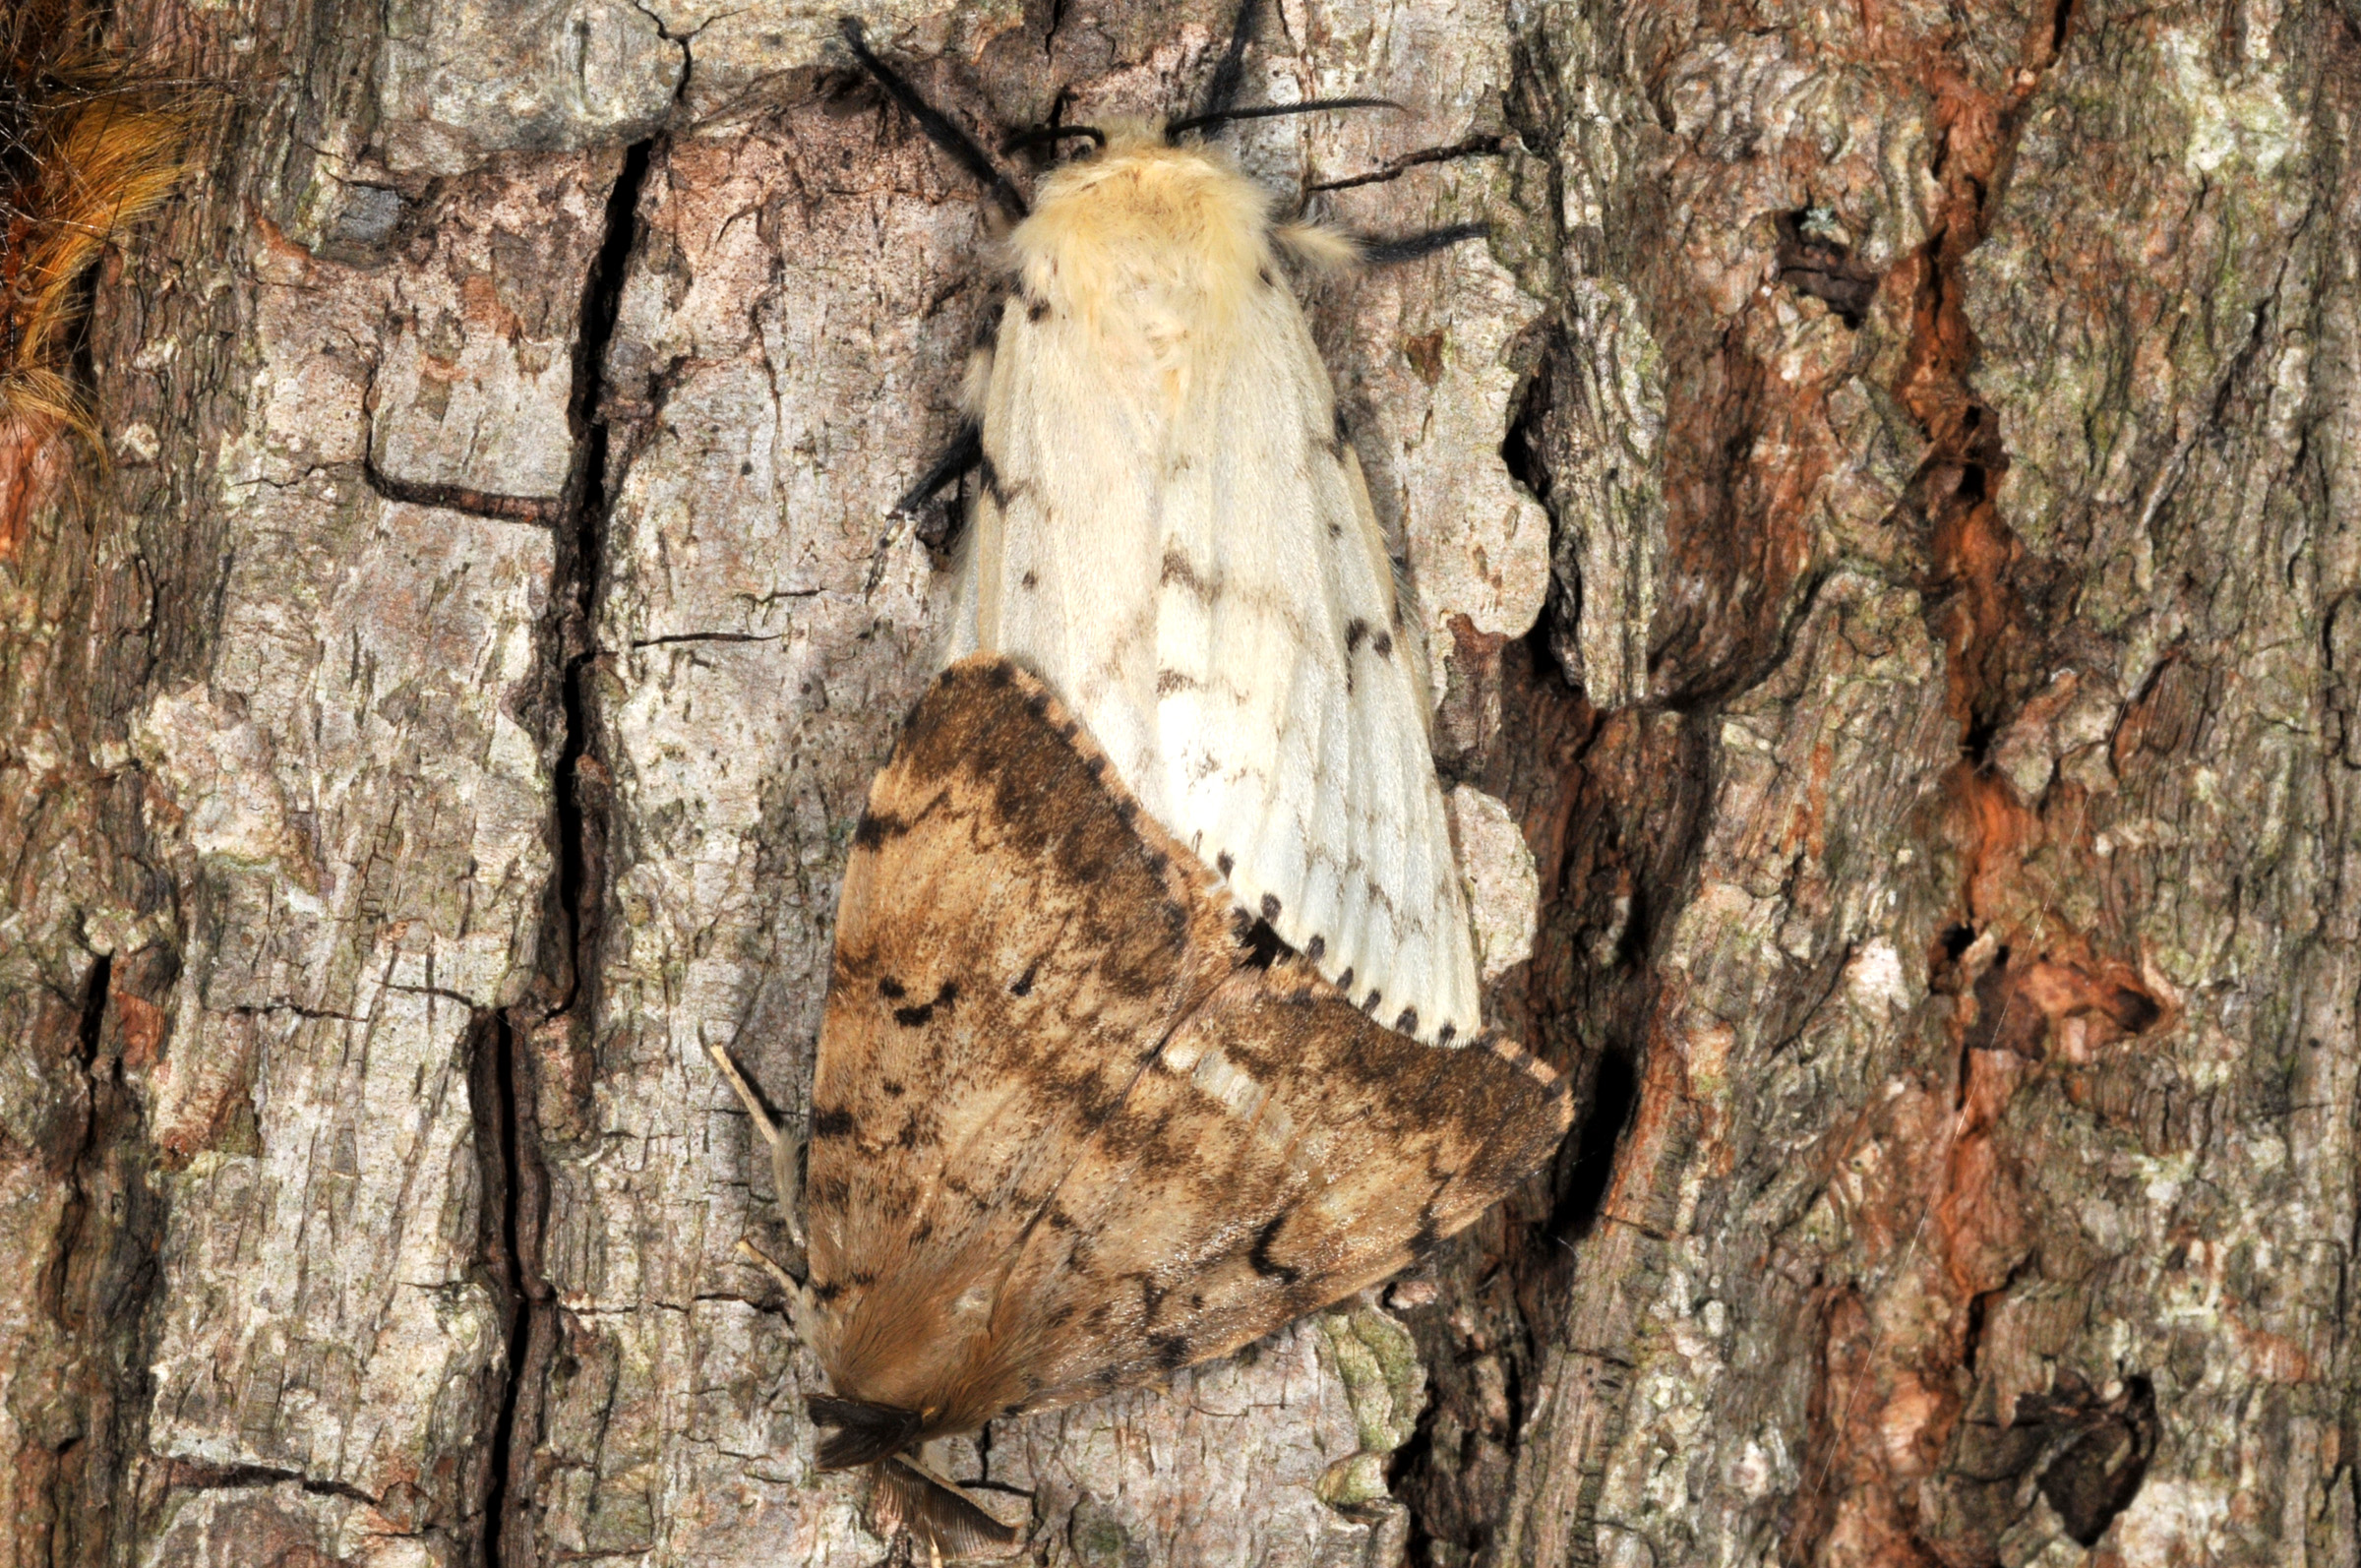 Q&A's About Using Pheromones and Controlling Gypsy Moth